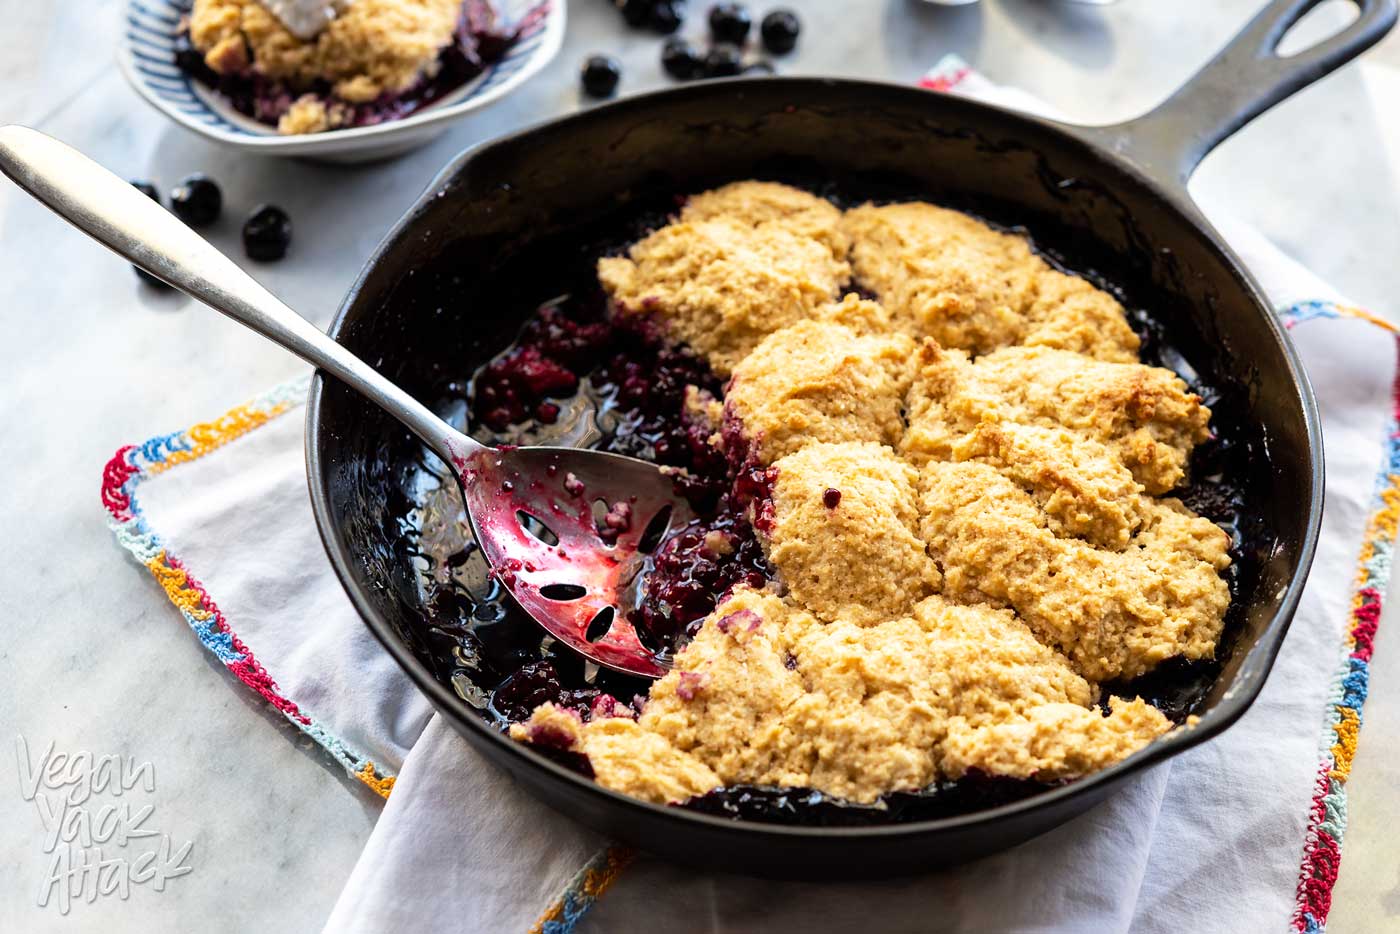 Cast iron skillet of blackberry cobbler with biscuit topping, with spoon